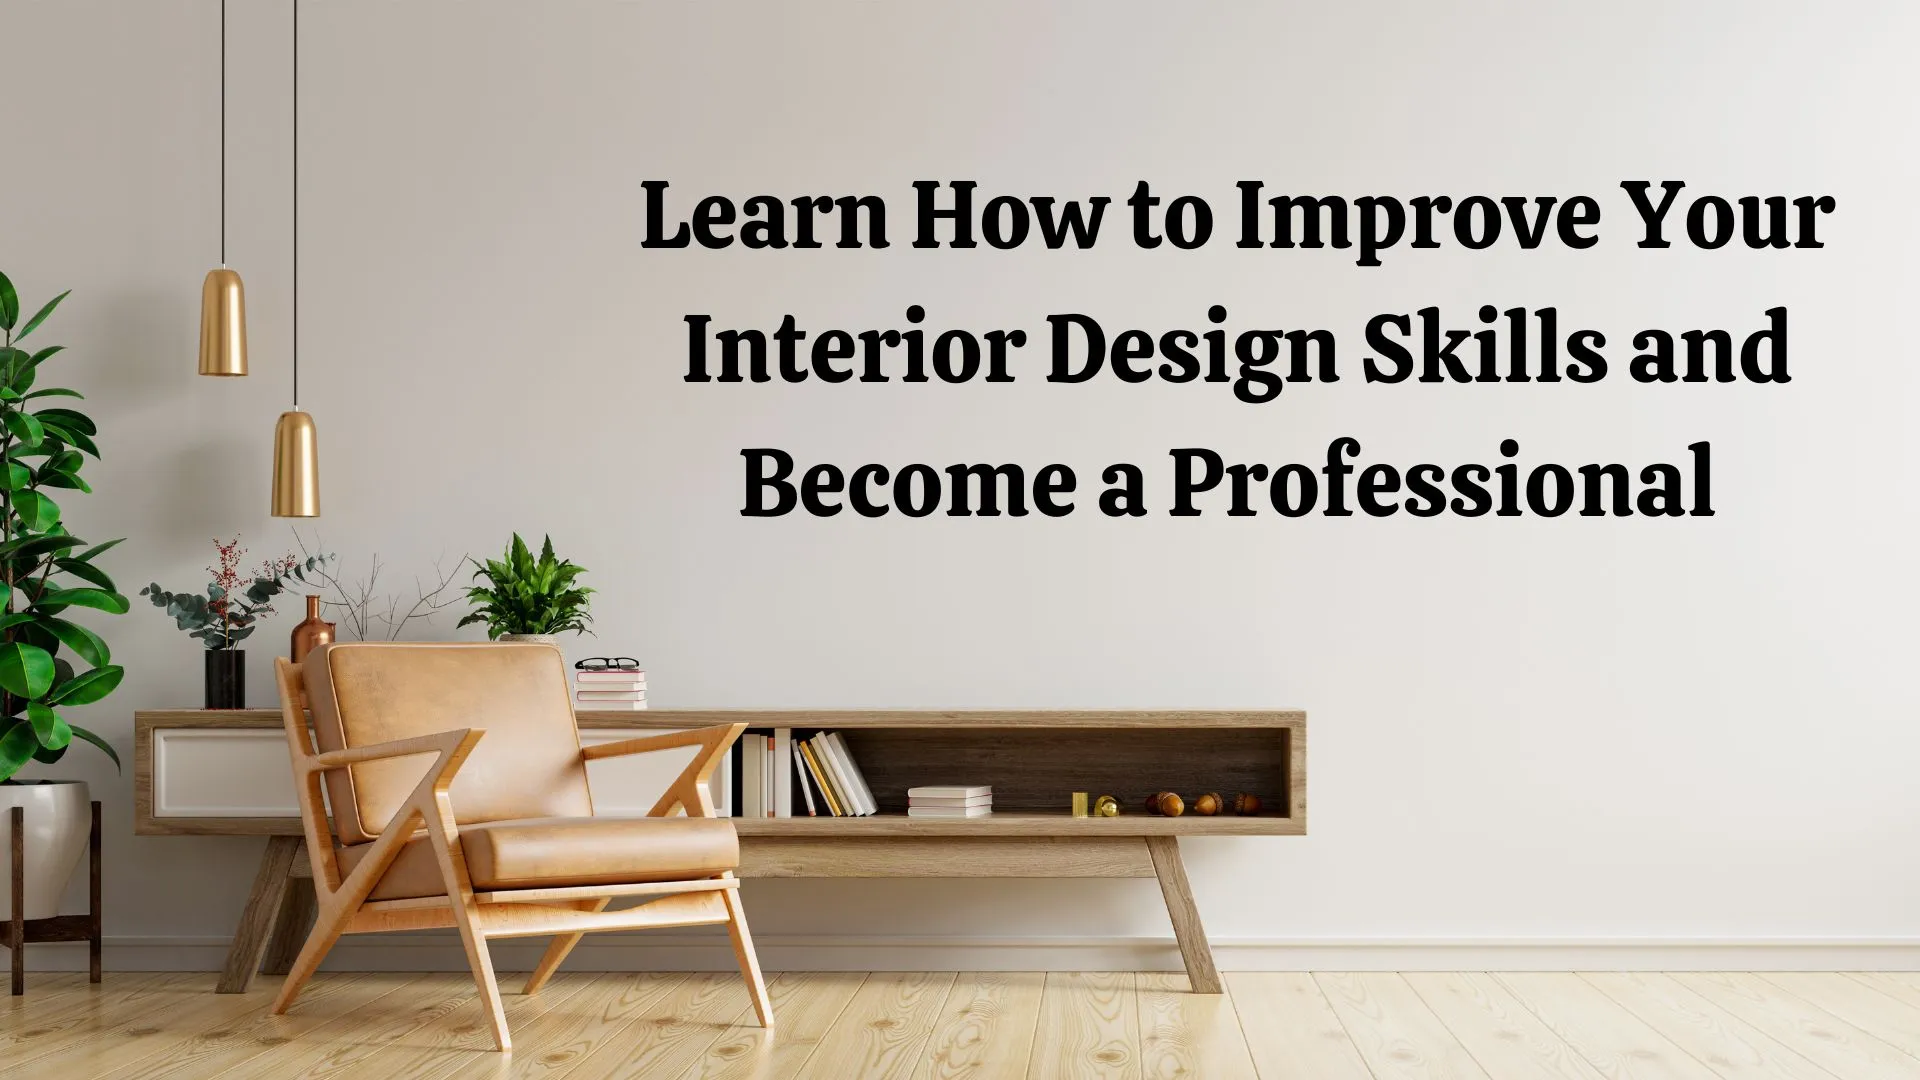 Blog Learn How To Improve Your Interior Design Skills And Become A Professional.webp